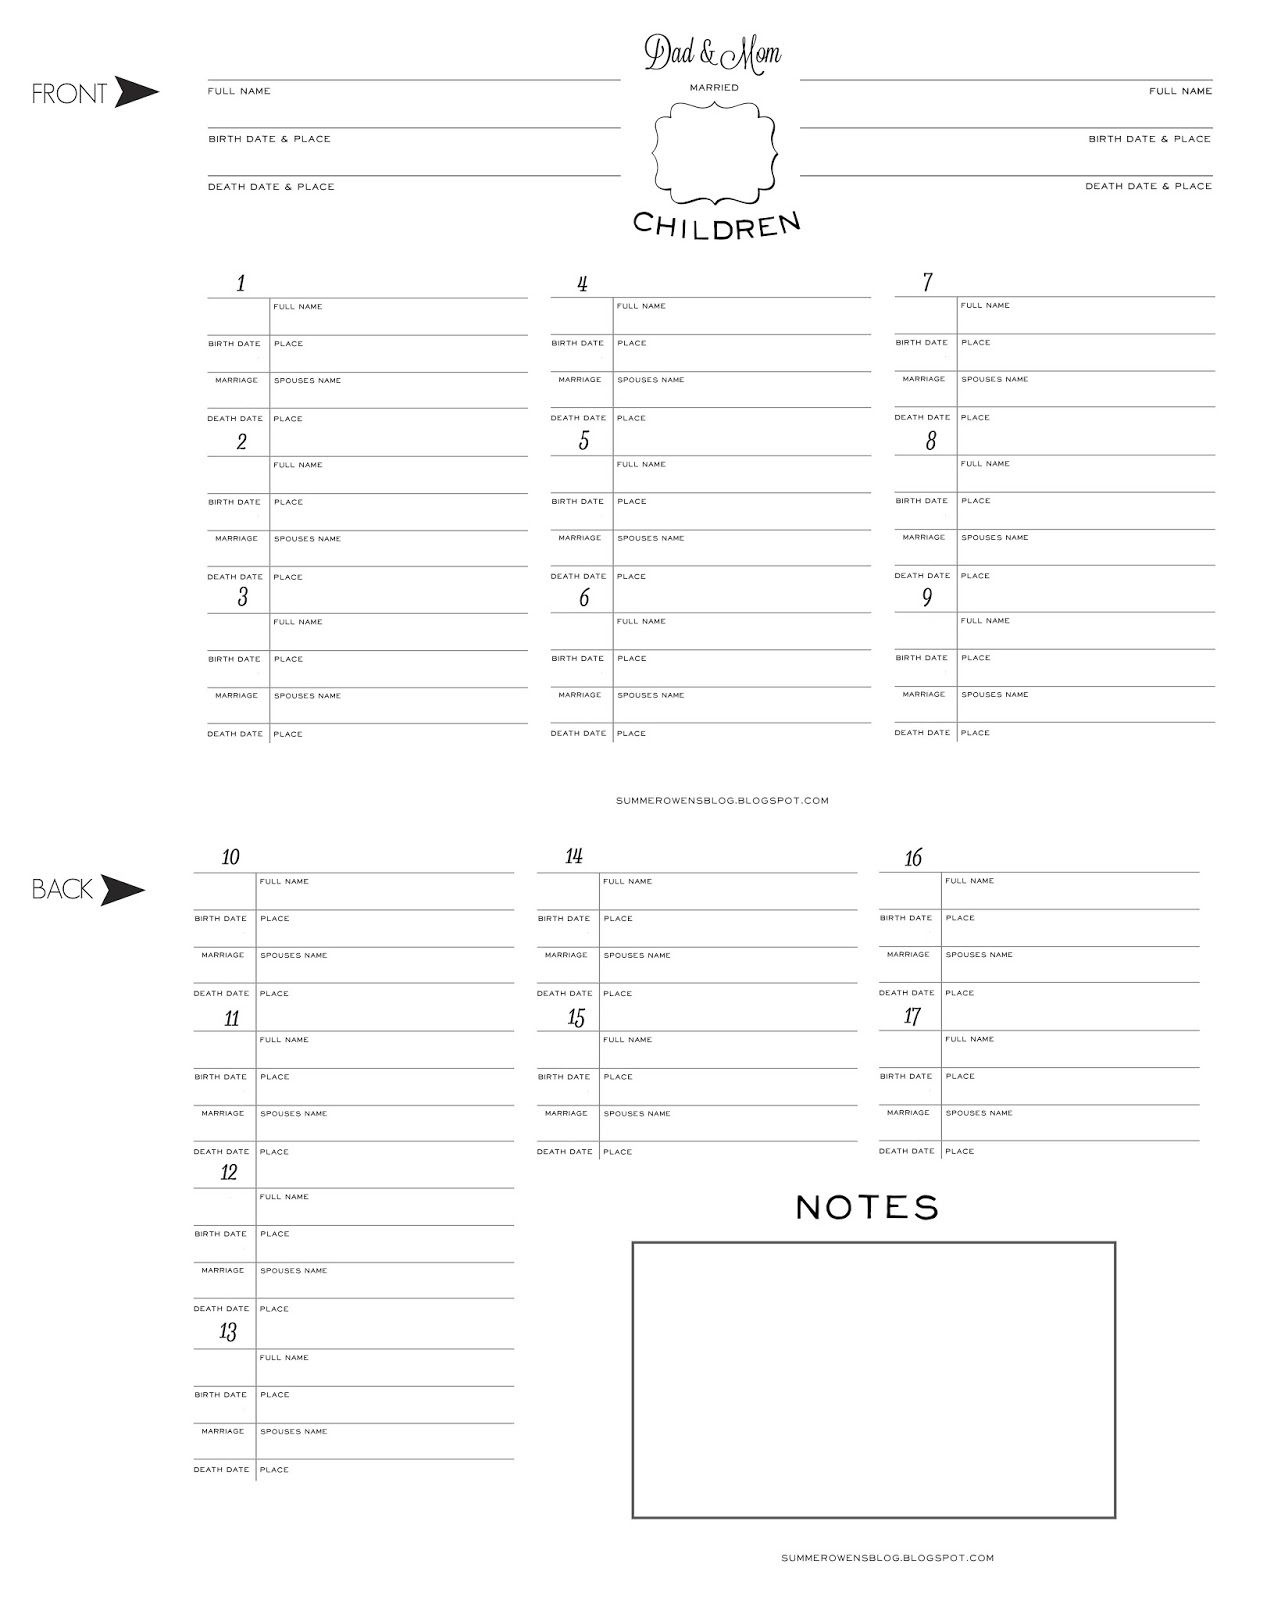 Free Printable - Family Group Sheet, Family Group Record, Extra - Free Printable Genealogy Worksheets